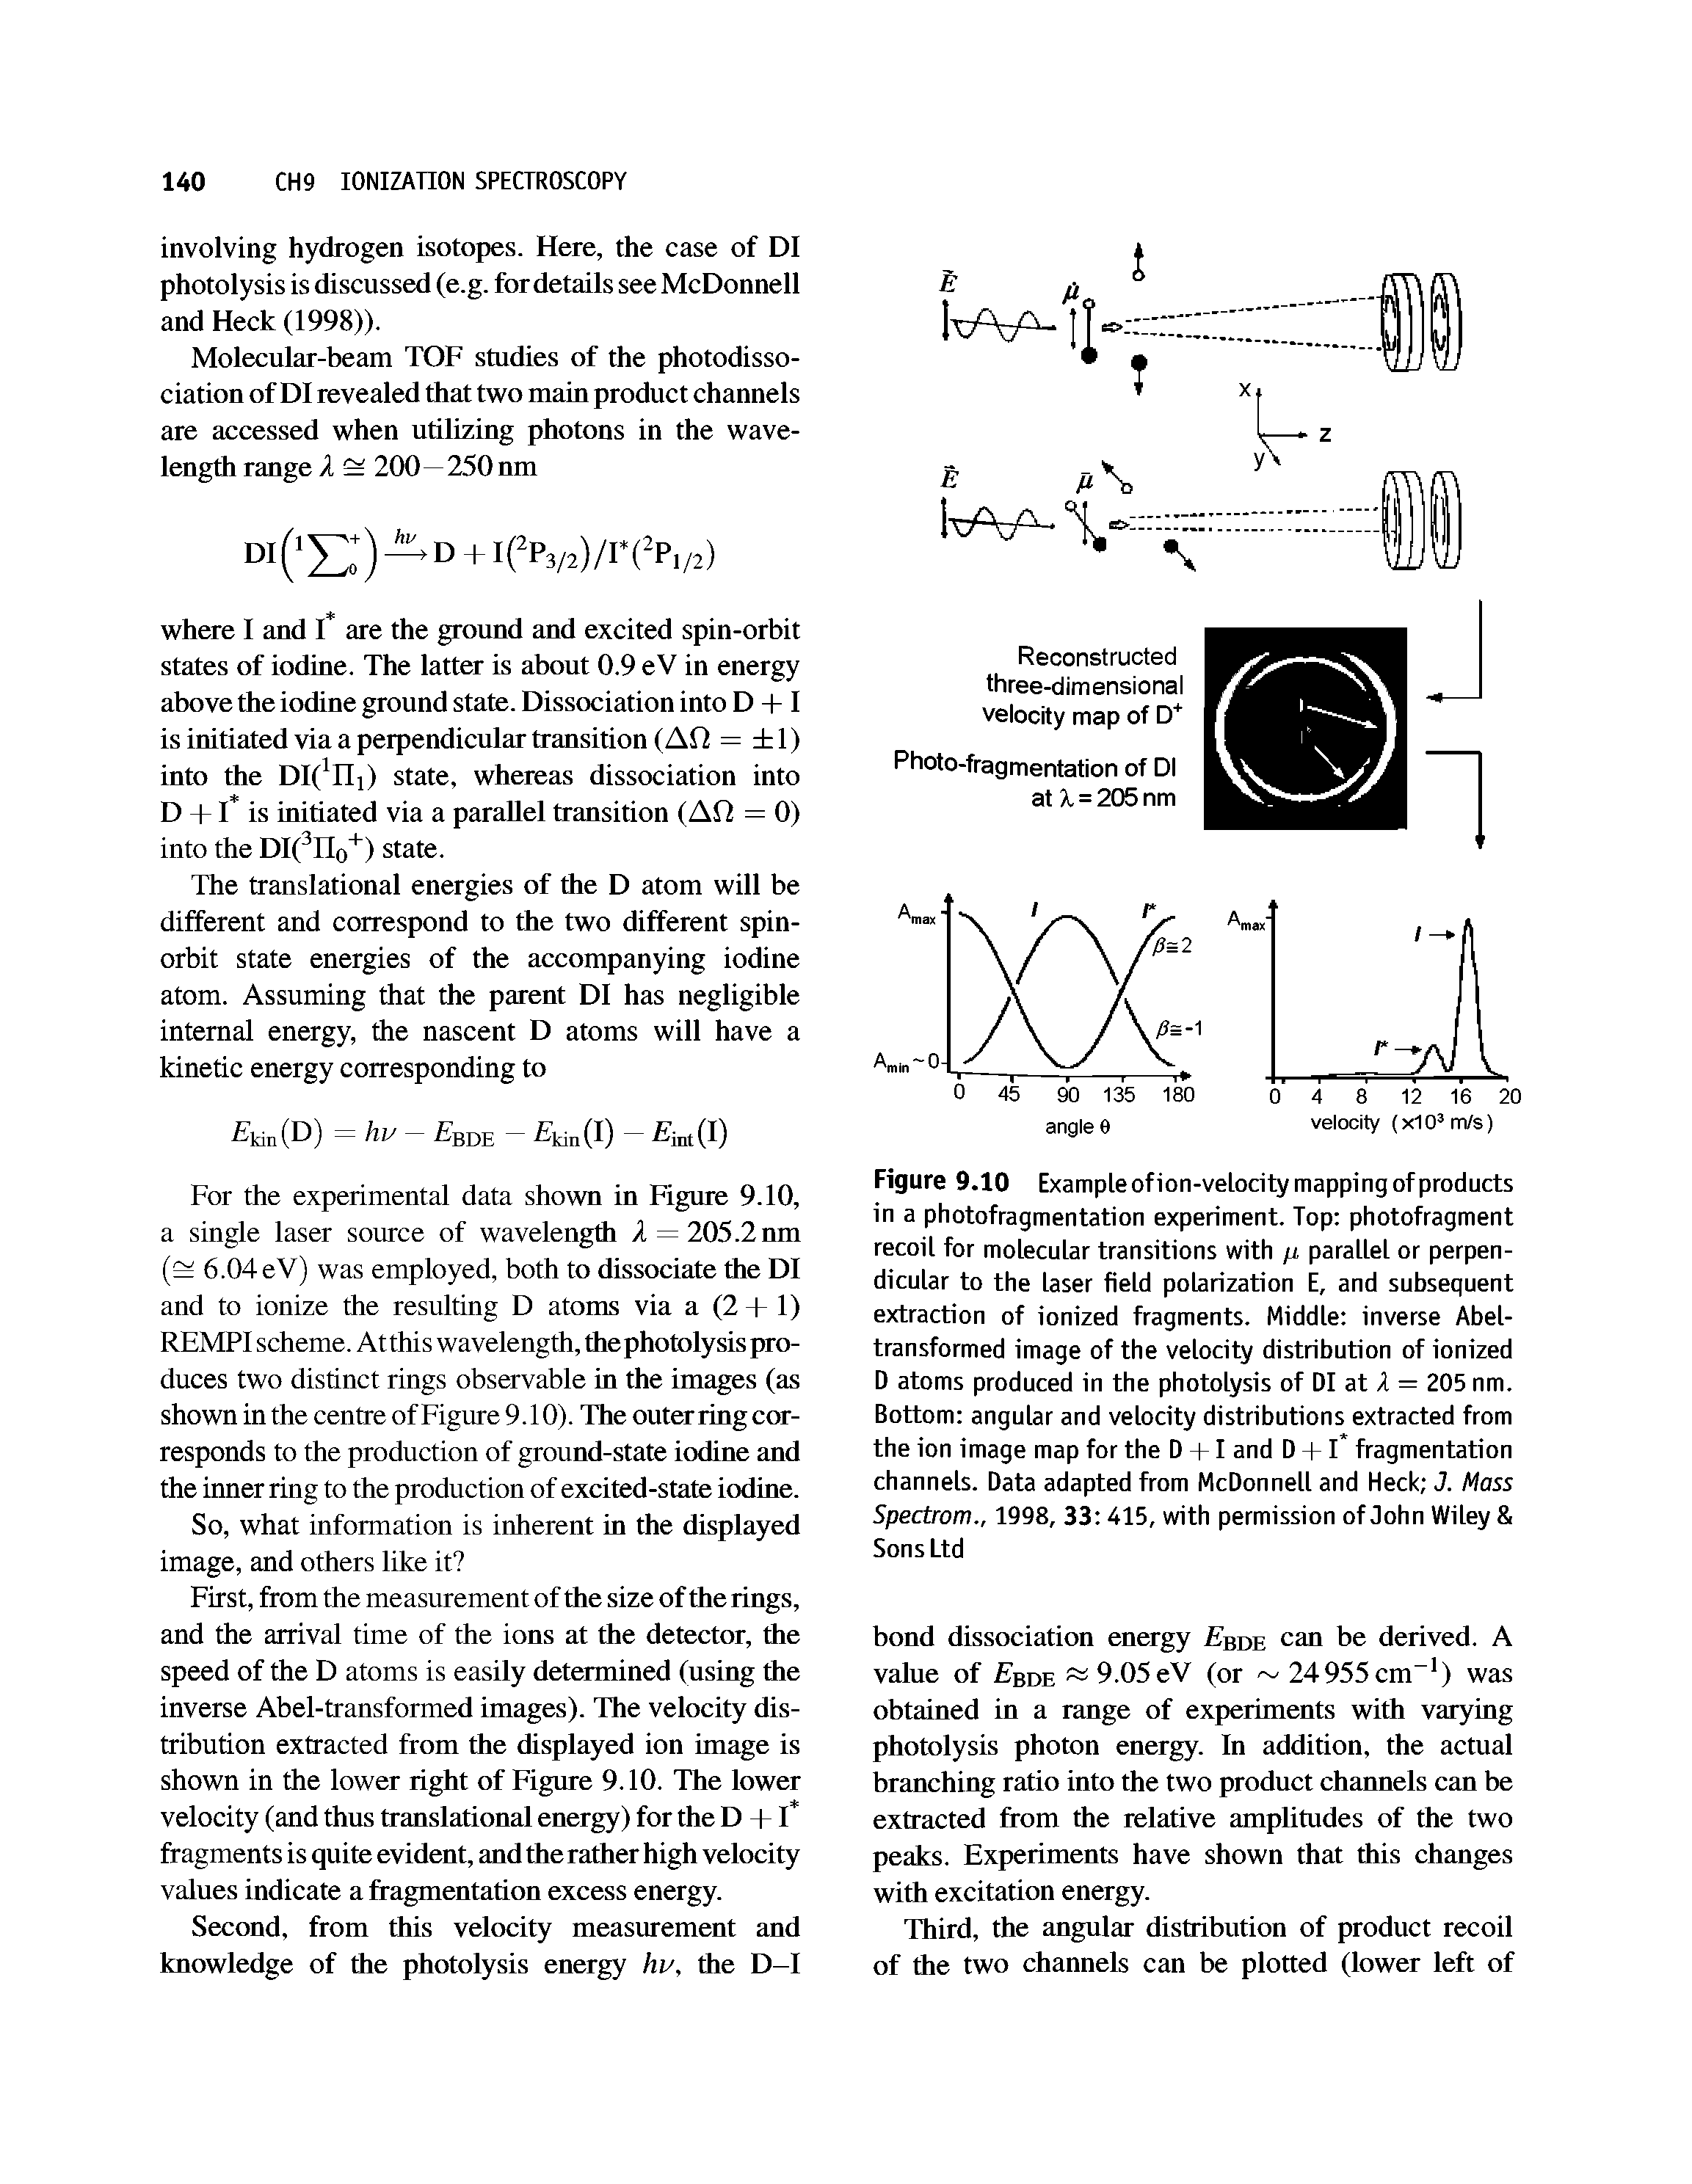 Figure 9.10 Exampleofion-velodtymappingofproducts in a photofragmentation experiment. Top photofragment recoil for molecular transitions with fi parallel or perpendicular to the laser field polarization E, and subsequent extraction of ionized fragments. Middle inverse Abel-transformed image of the velocity distribution of ionized D atoms produced in the photolysis of DI at A = 205 nm. Bottom angular and velodty distributions extracted from the ion image map for the D -EI and D -E I fragmentation channels. Data adapted from McDonnell and Heck J. Mass Spectrom., 1998, 33 415, with permission of John Wiley Sons Ltd...